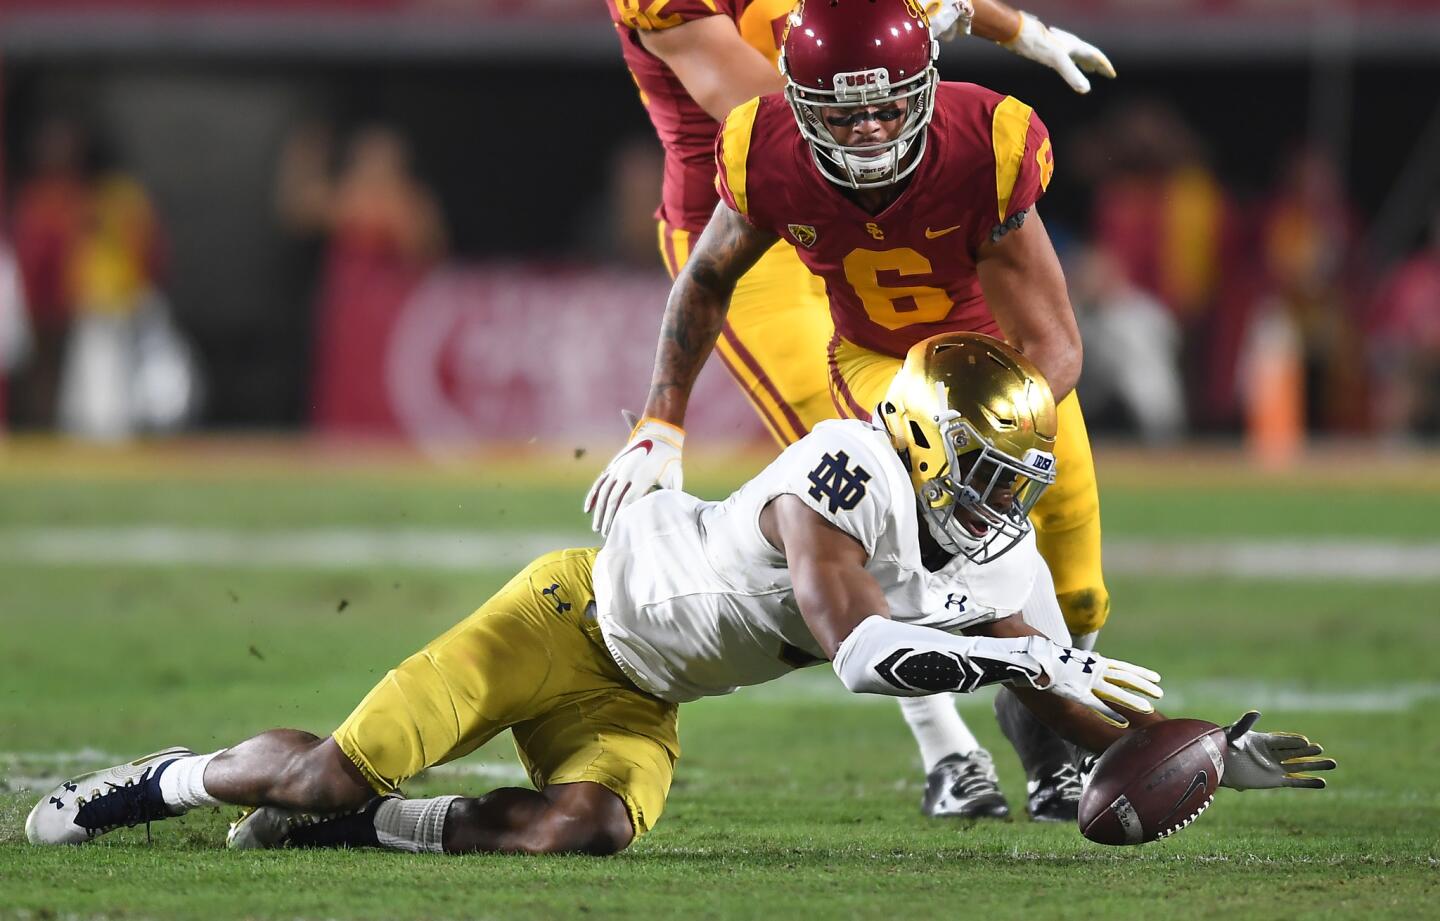 Notre Dame's Troy Price recovers a fumble by USC receiver Michael Pittman in the first quarter at the Coliseum.